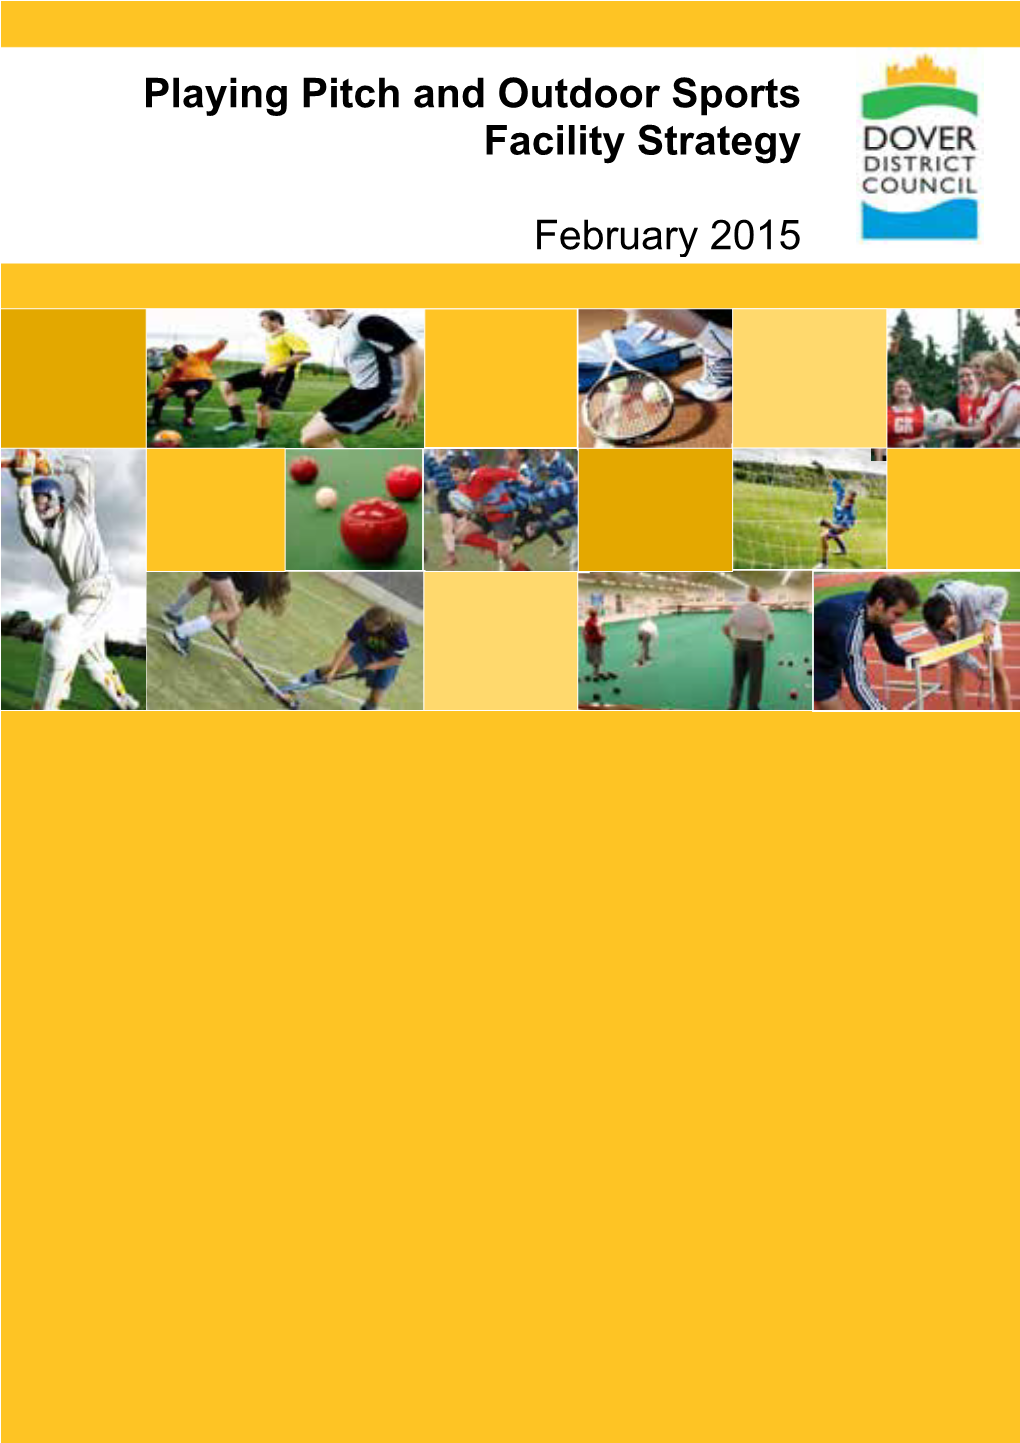 Playing Pitch and Outdoor Sports Facility Strategy February 2015